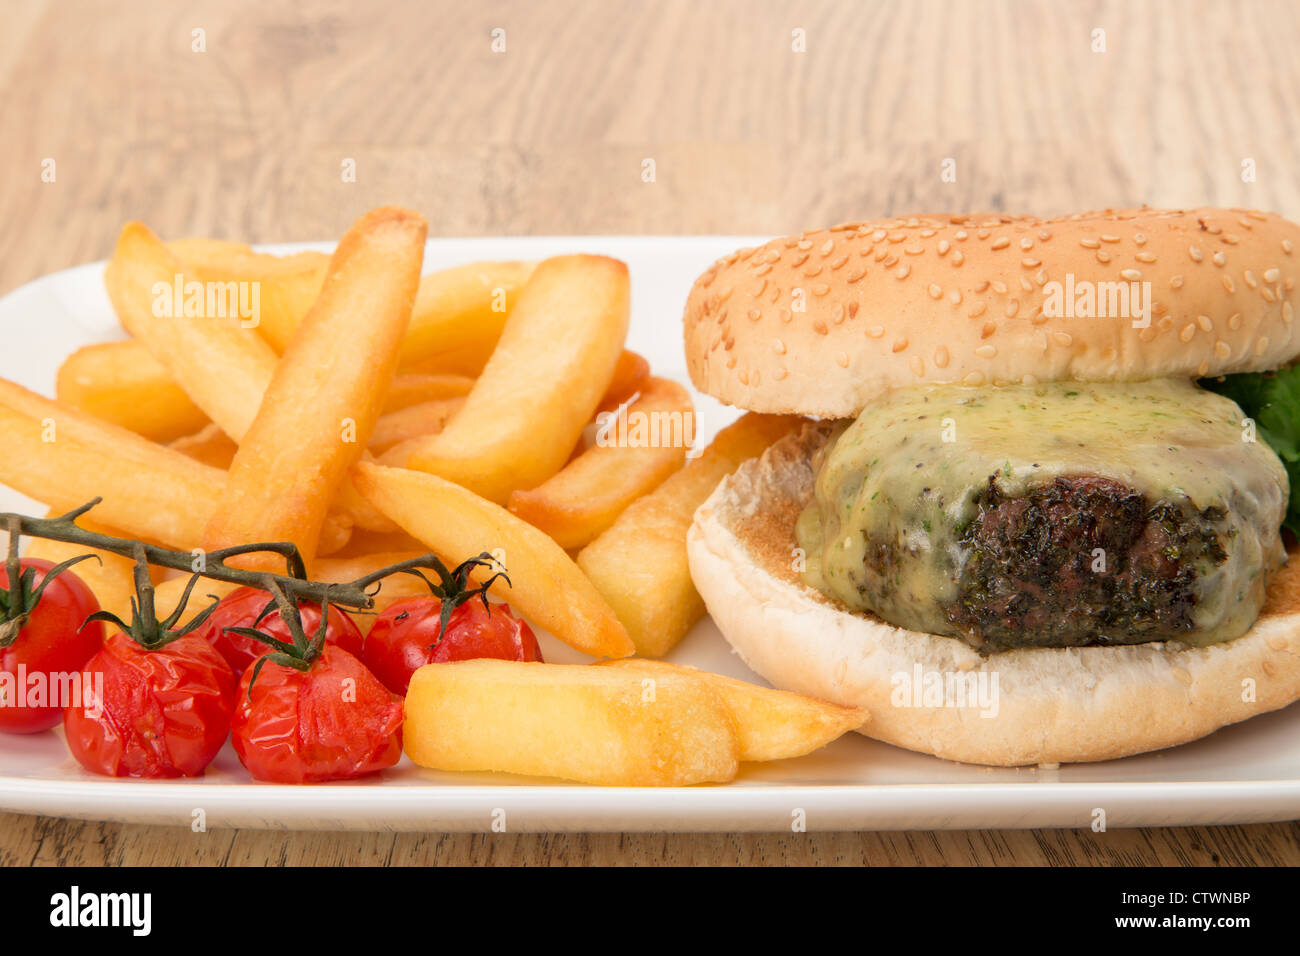 Burger and fries dinner - studio shot with a shallow depth of field. Stock Photo